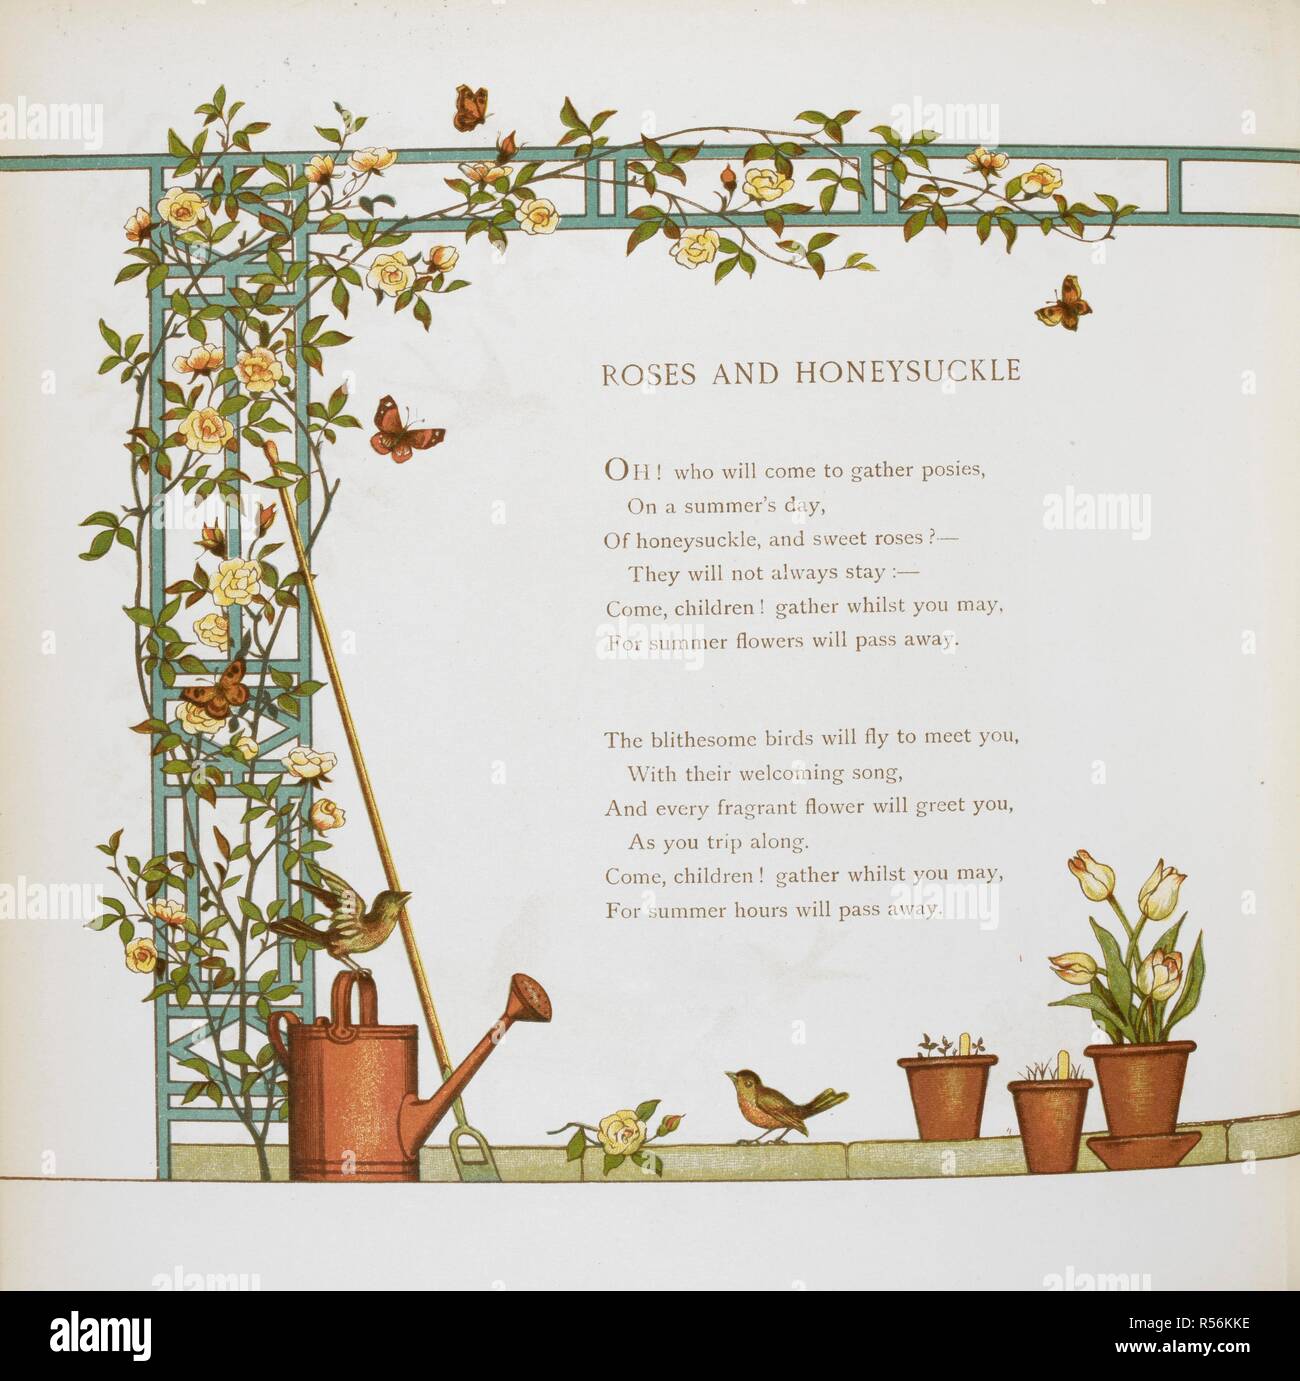 'Roses and Honeysuckle'. Roses entwined around a wooden frame. Below, a watering can, a hoe and flowers in pots. At Home again. Verses. [Illustrated by] J. G. Sowerby and T. Crane. London : Marcus Ward & Co., [1886]. Source: 12806.t.30, page 16. Language: English. Author: Sowerby, John: Crane, T. Stock Photo